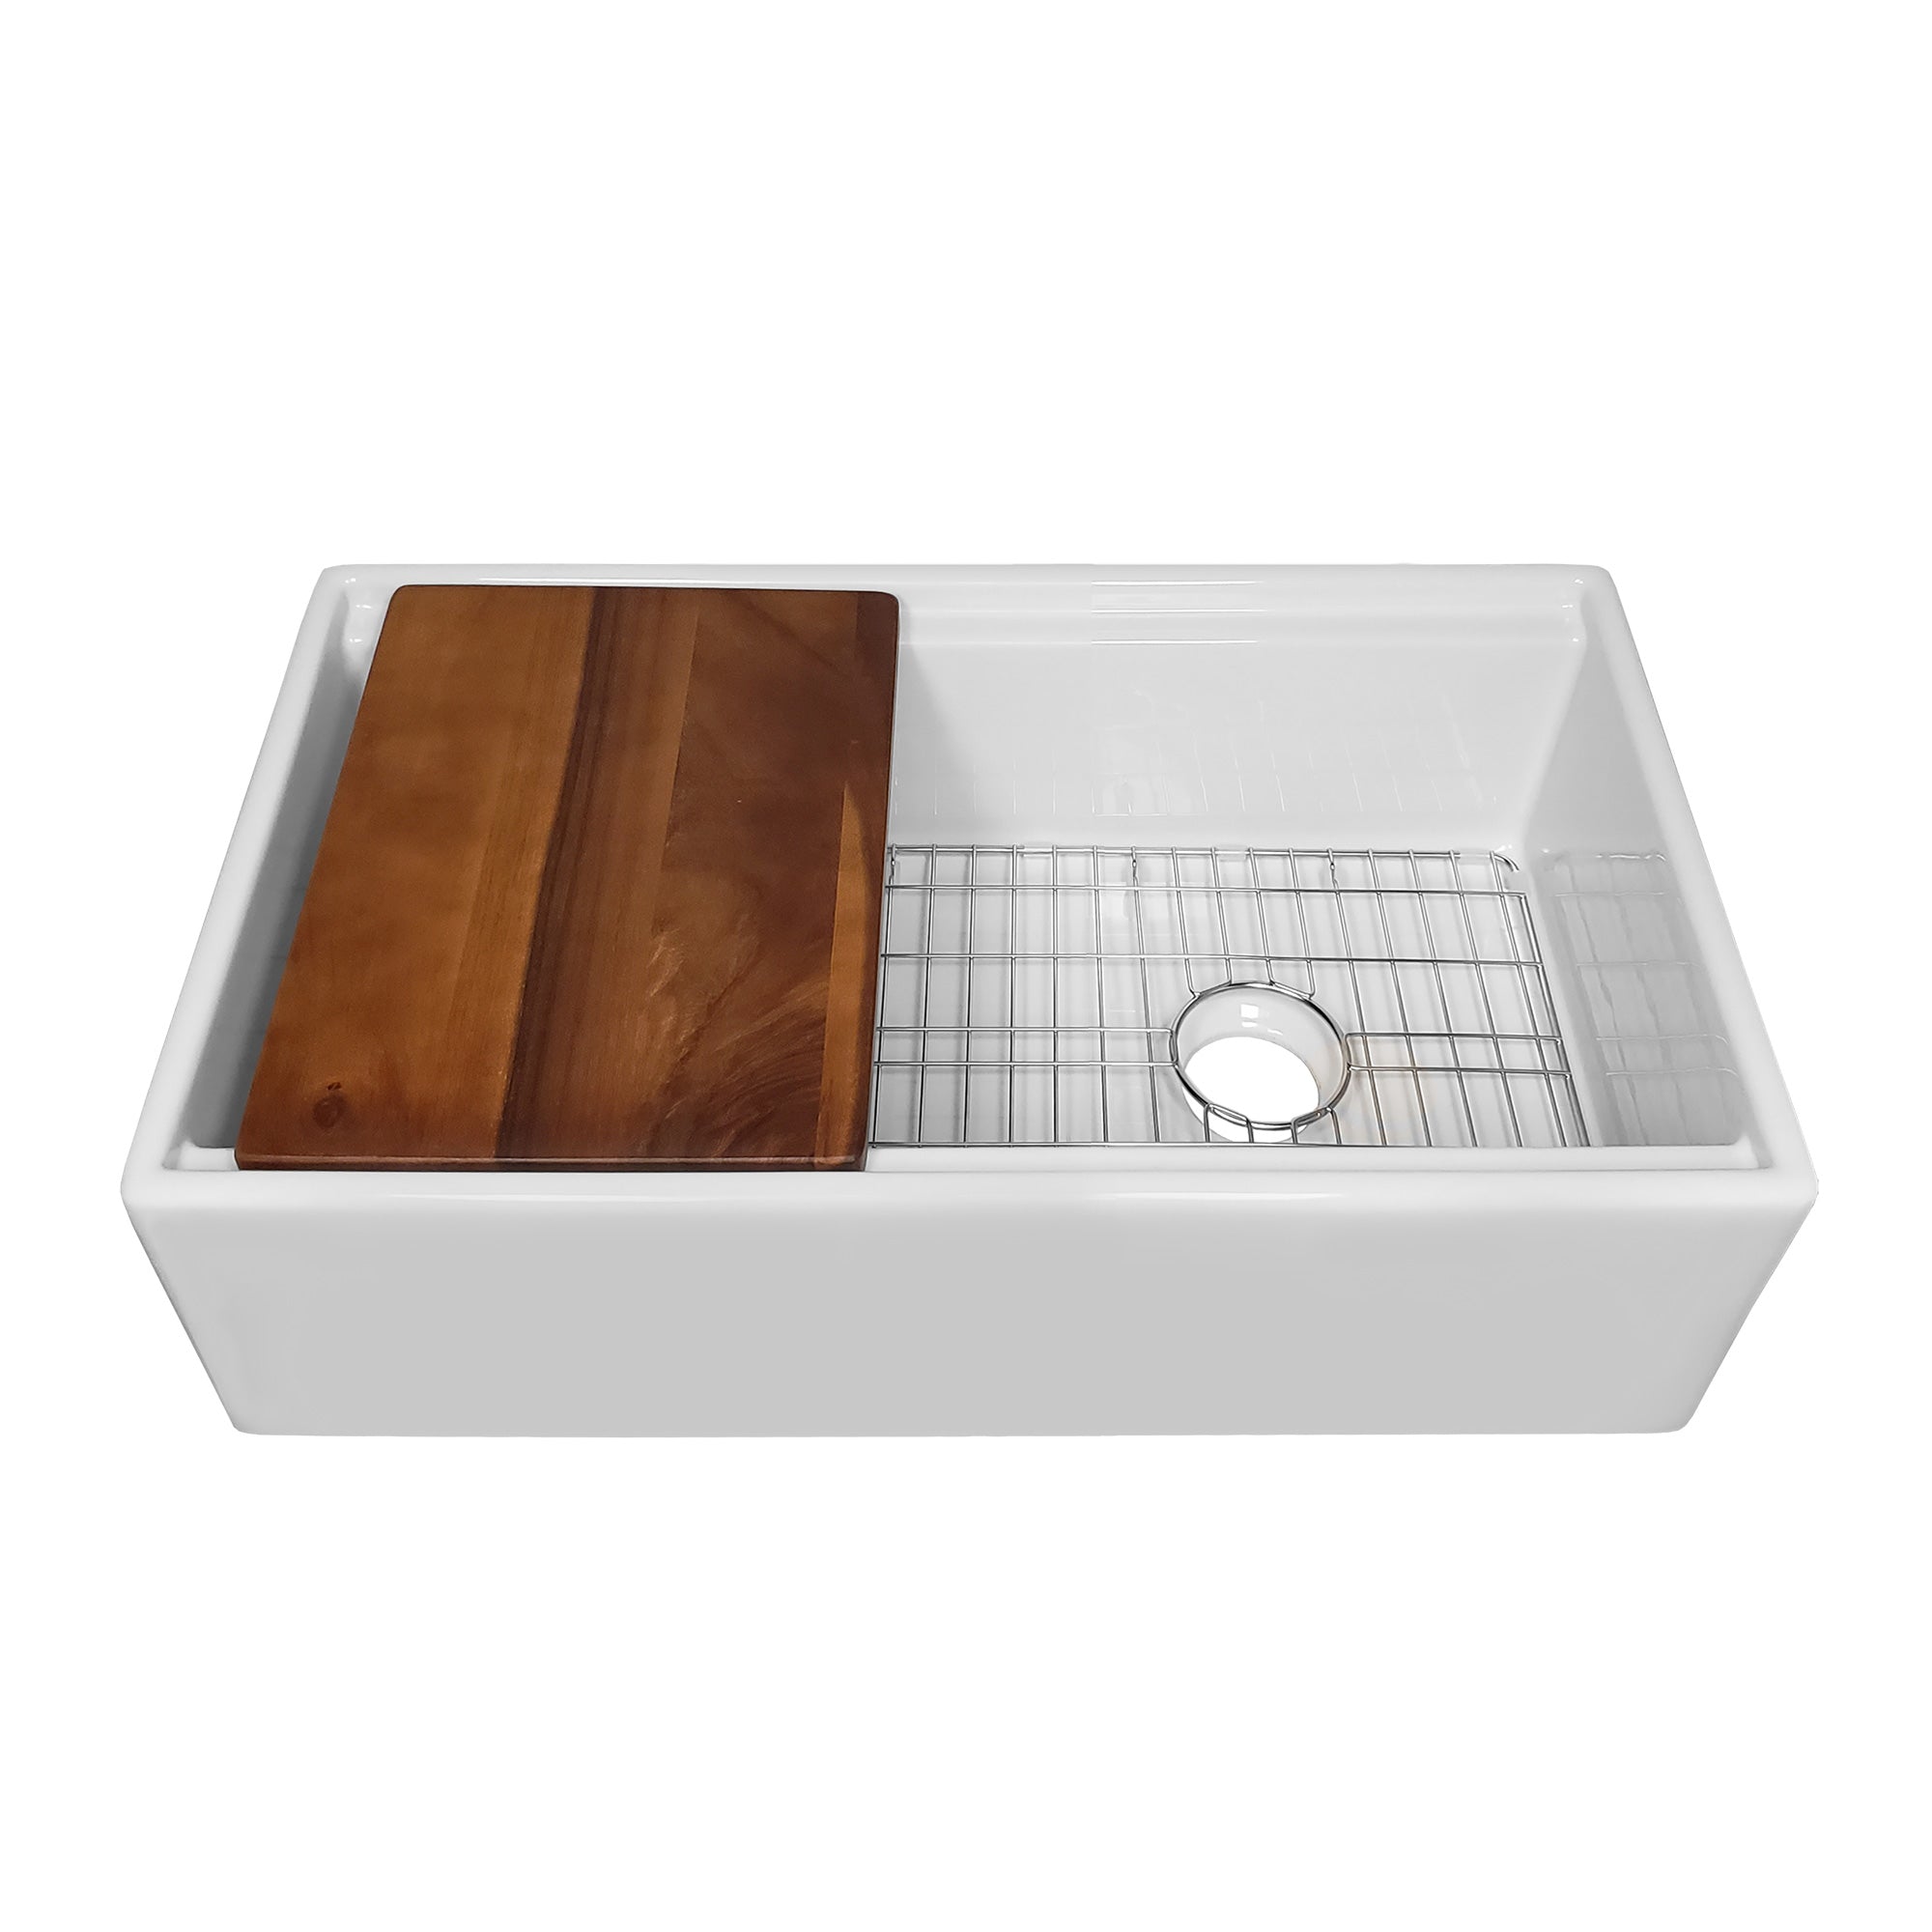 Front Apron Single Bowl Fireclay Kitchen Sinks With Walnut Wood Cutting Board and Stainless Steel Grid